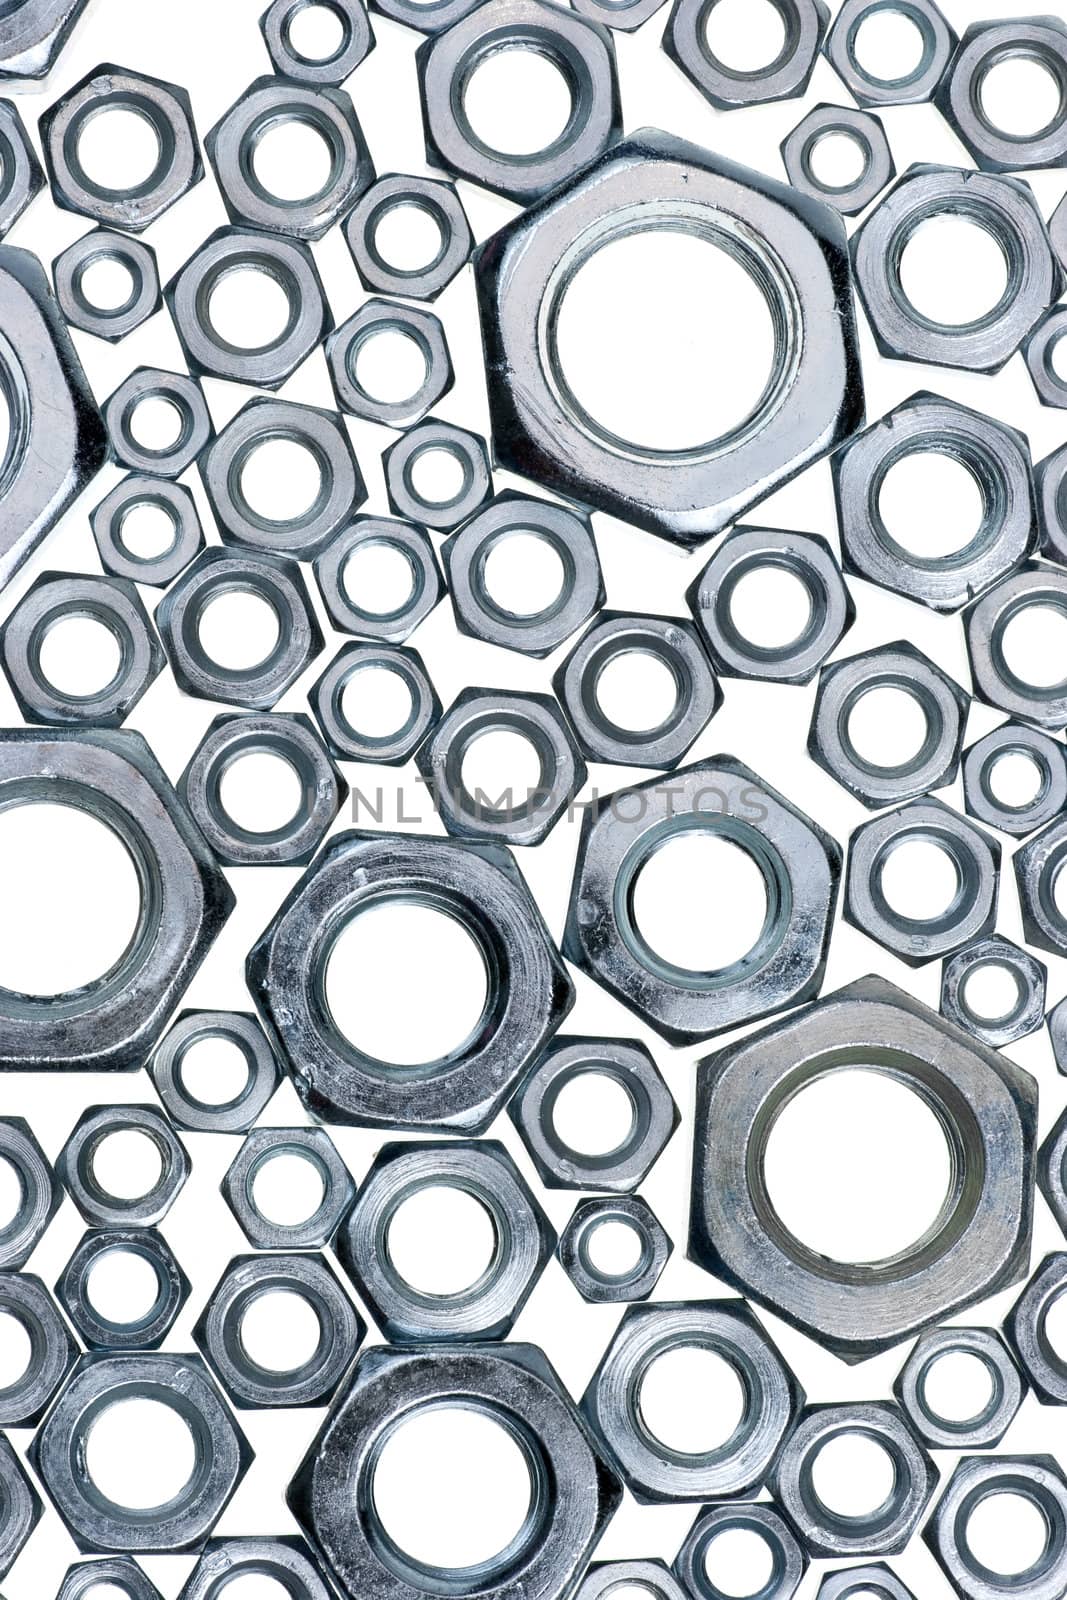 Assorted hex nuts on white background